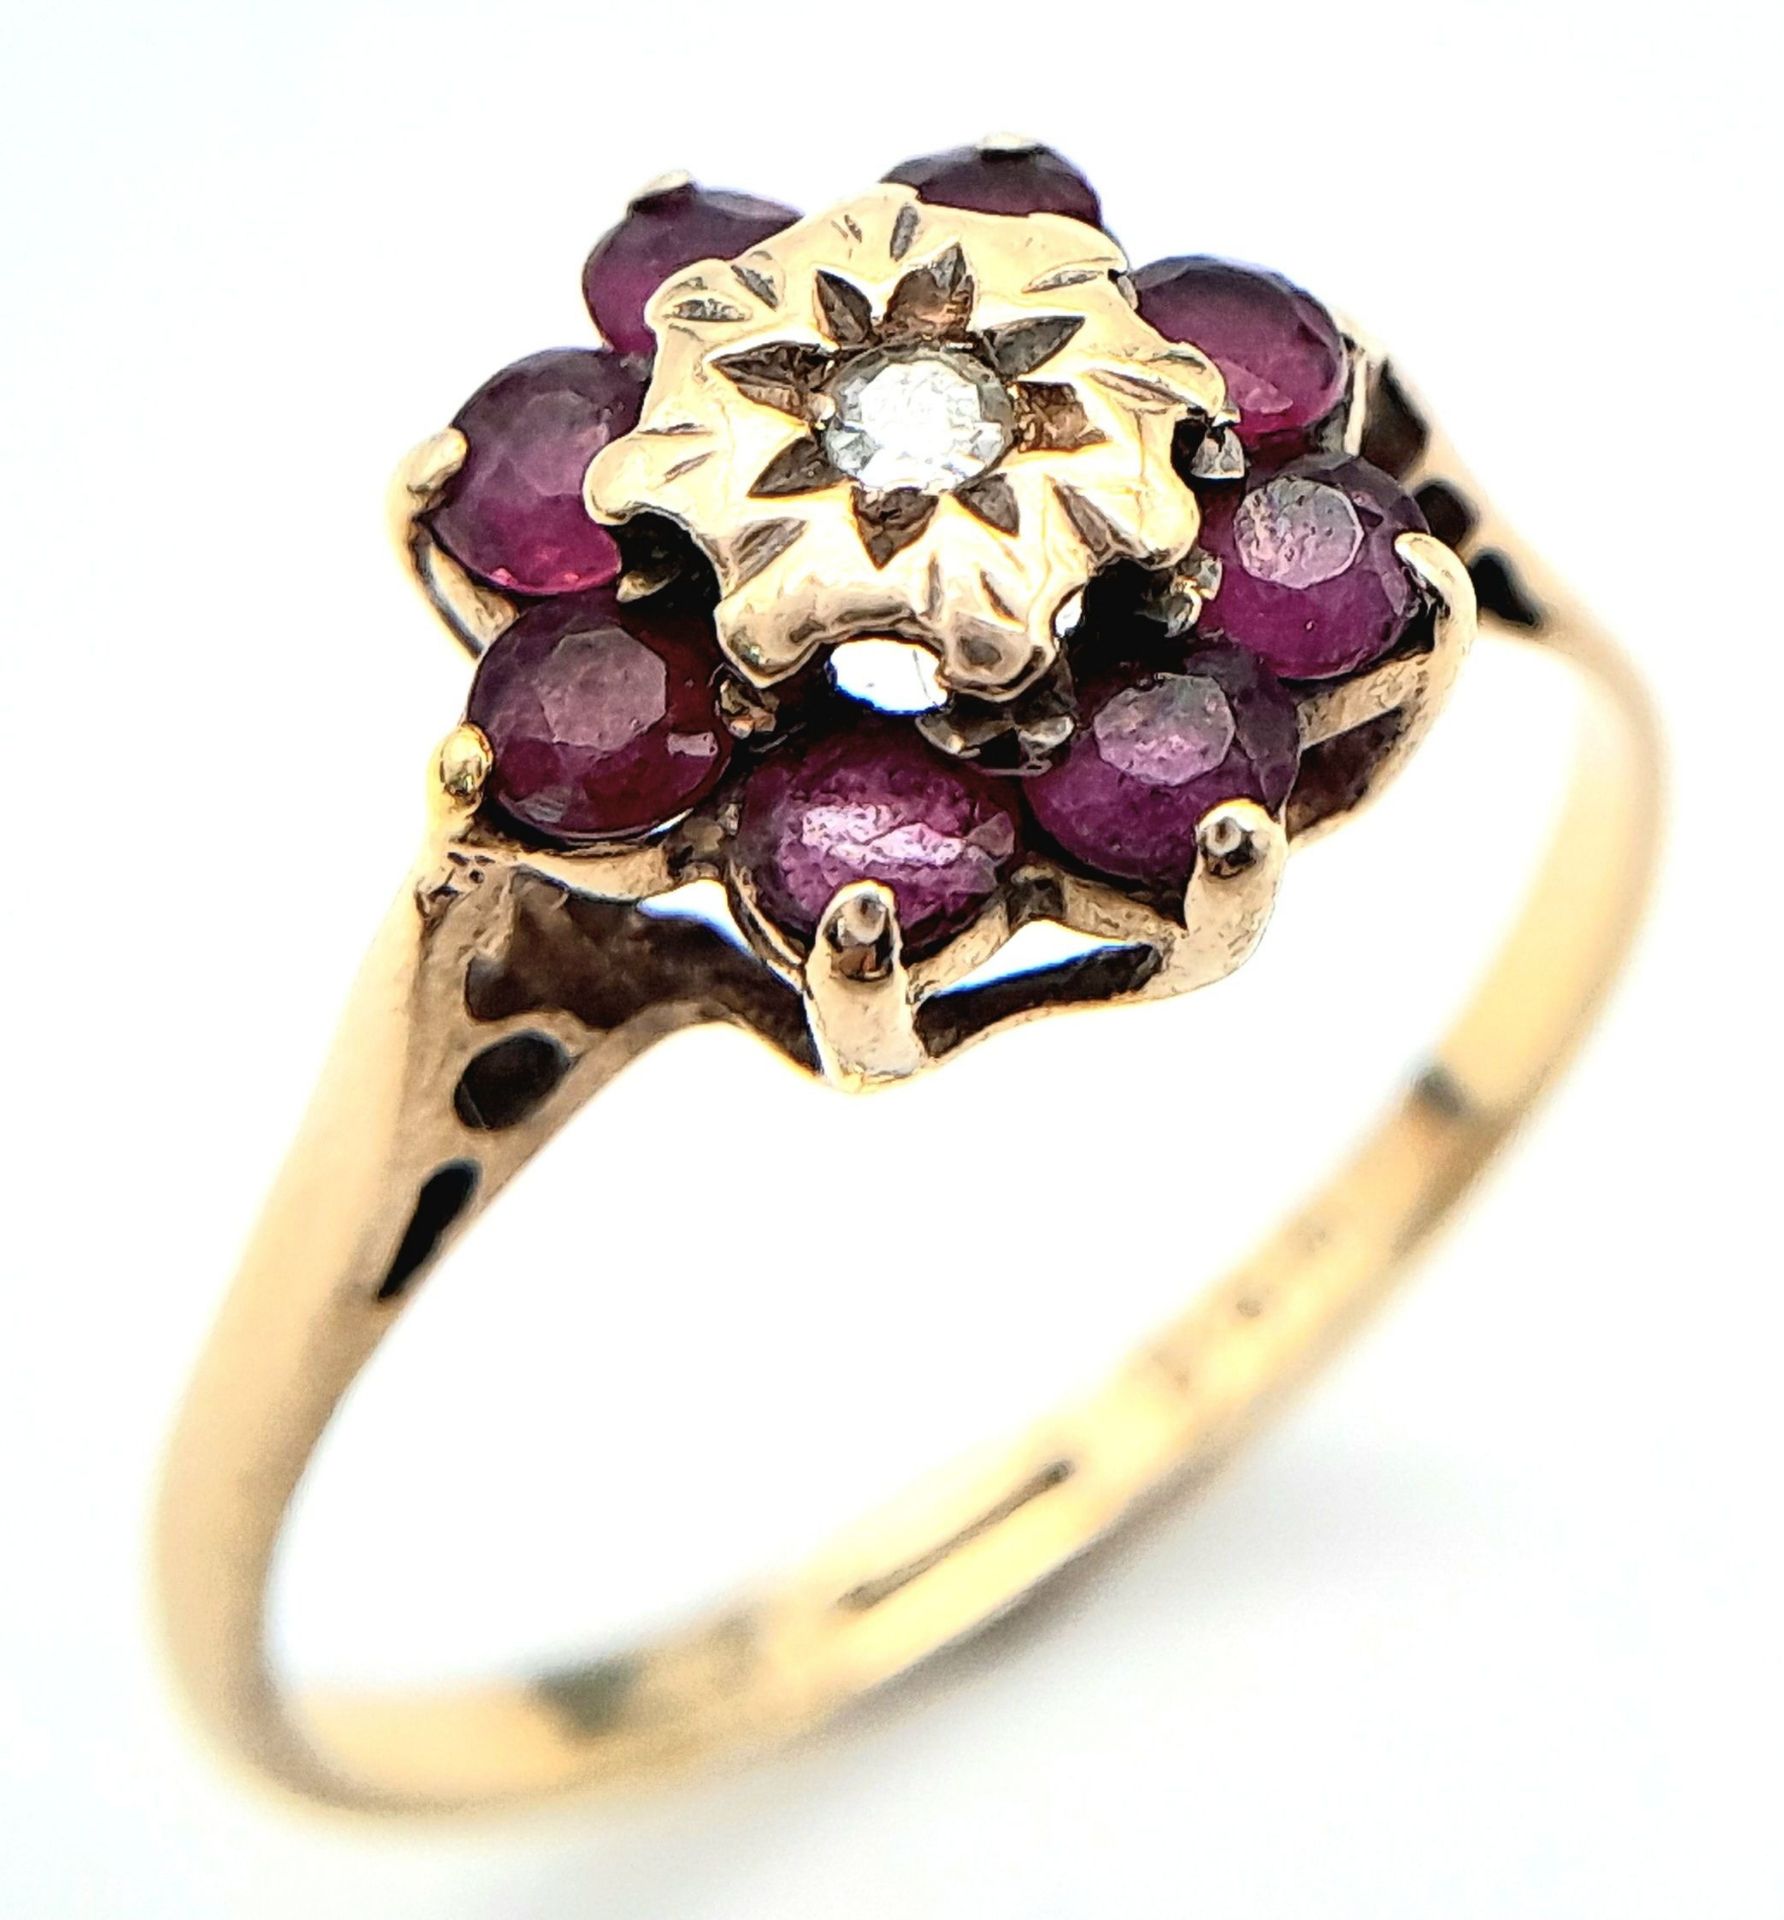 A 9K YELLOW GOLD DIAMOND & RUBY CLUSTER RING. Size M, 1.7g total weight. Ref: SC 8015 - Image 4 of 6